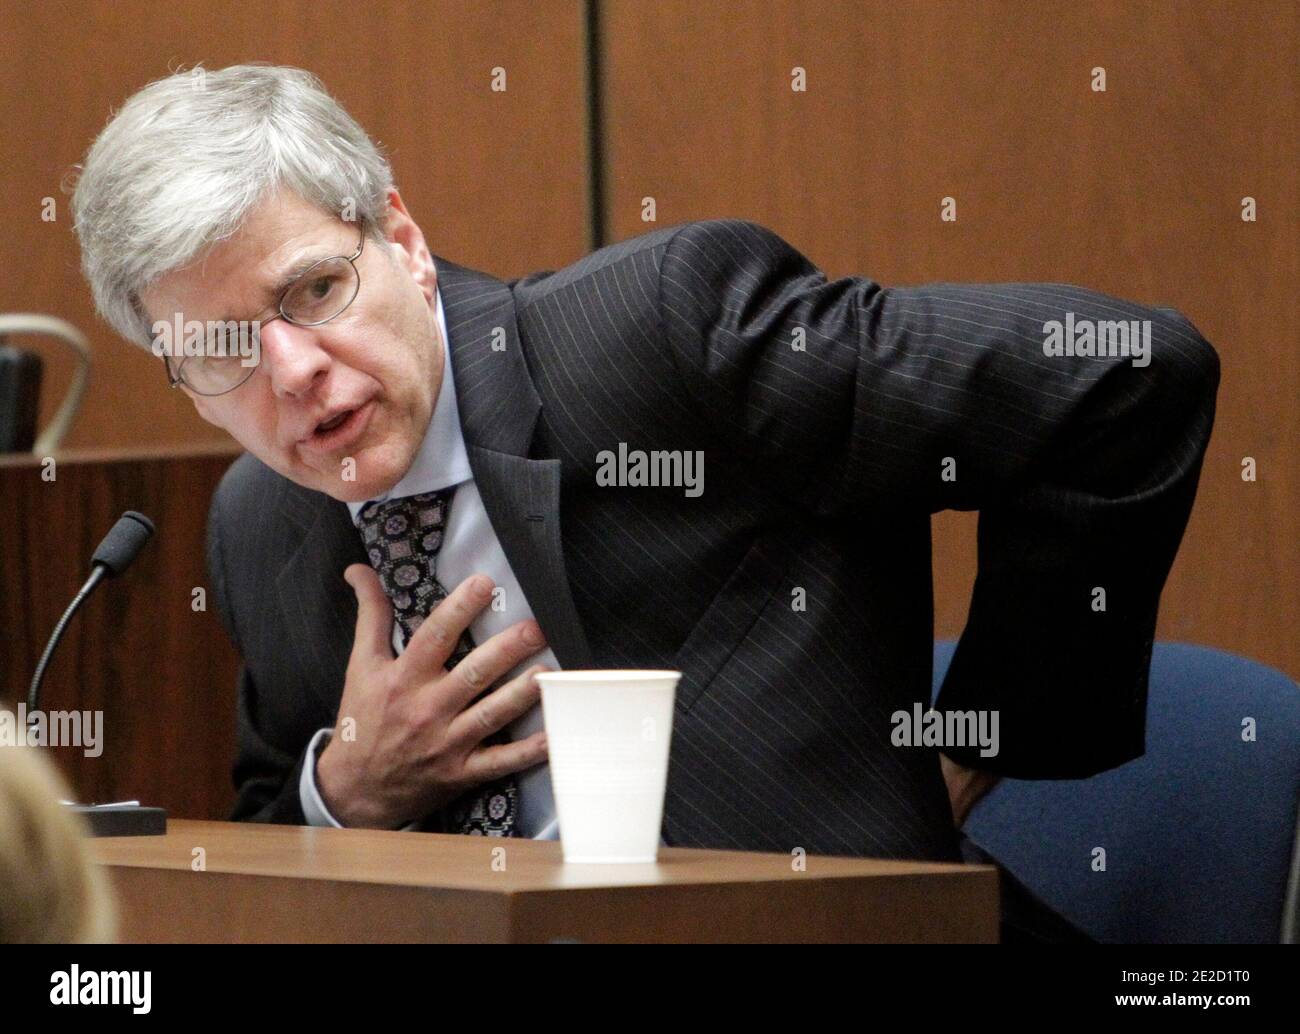 Anesthesiology expert Dr Steven Shafer gestures as part of testimony about the proper way to administer cardio-pulmonary resuscitation, during Dr. Conrad Murray's involuntary manslaughter trial in downtown Los Angeles on October 19, 2011. Murray has pleaded not guilty and faces four years in prison and the loss of his medical license if convicted of involuntary manslaughter in Michael Jackson's death. Photo by Reed Saxon/Pool/ABACAPRESS.COM Stock Photo